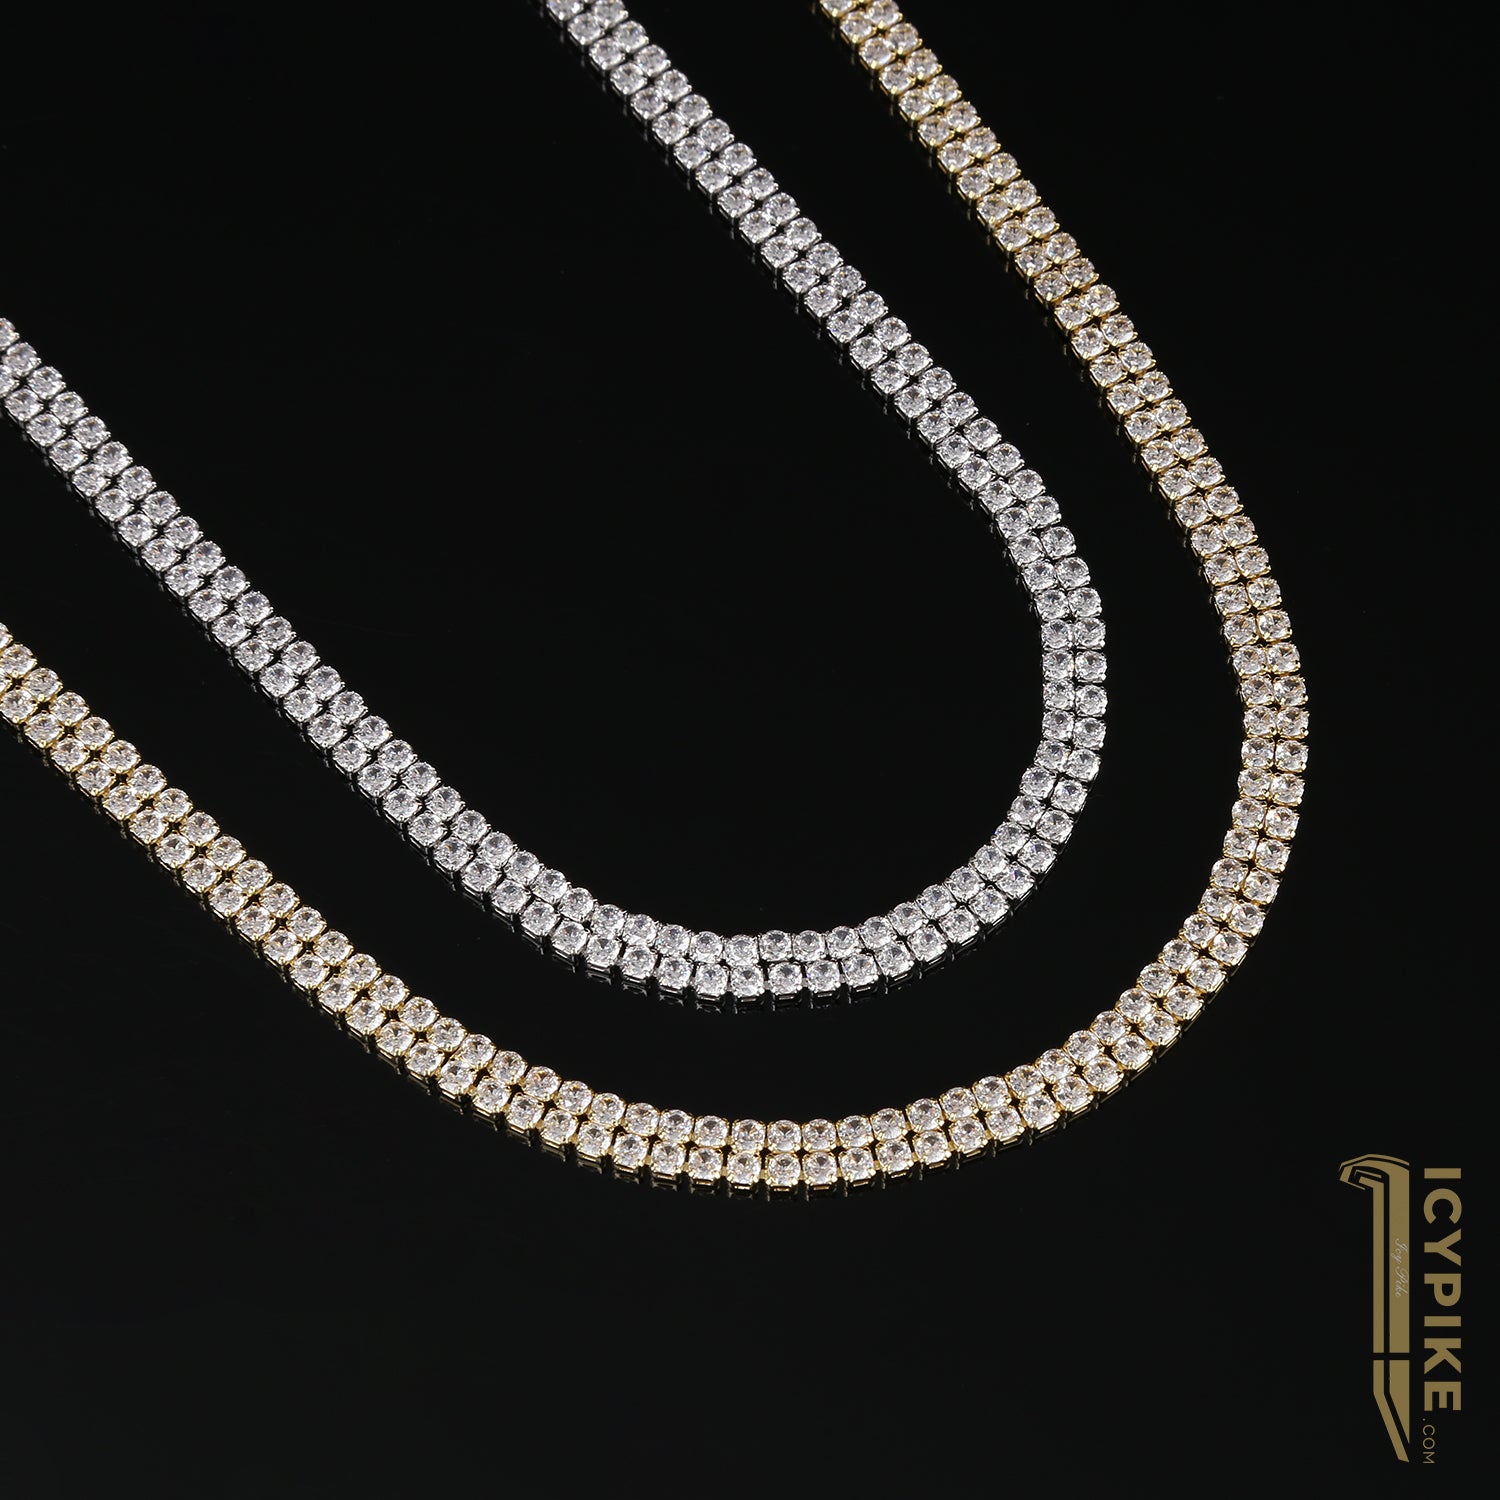 6mm 14K Gold Plated Tennis Necklace - {{ cuban link}} Chain